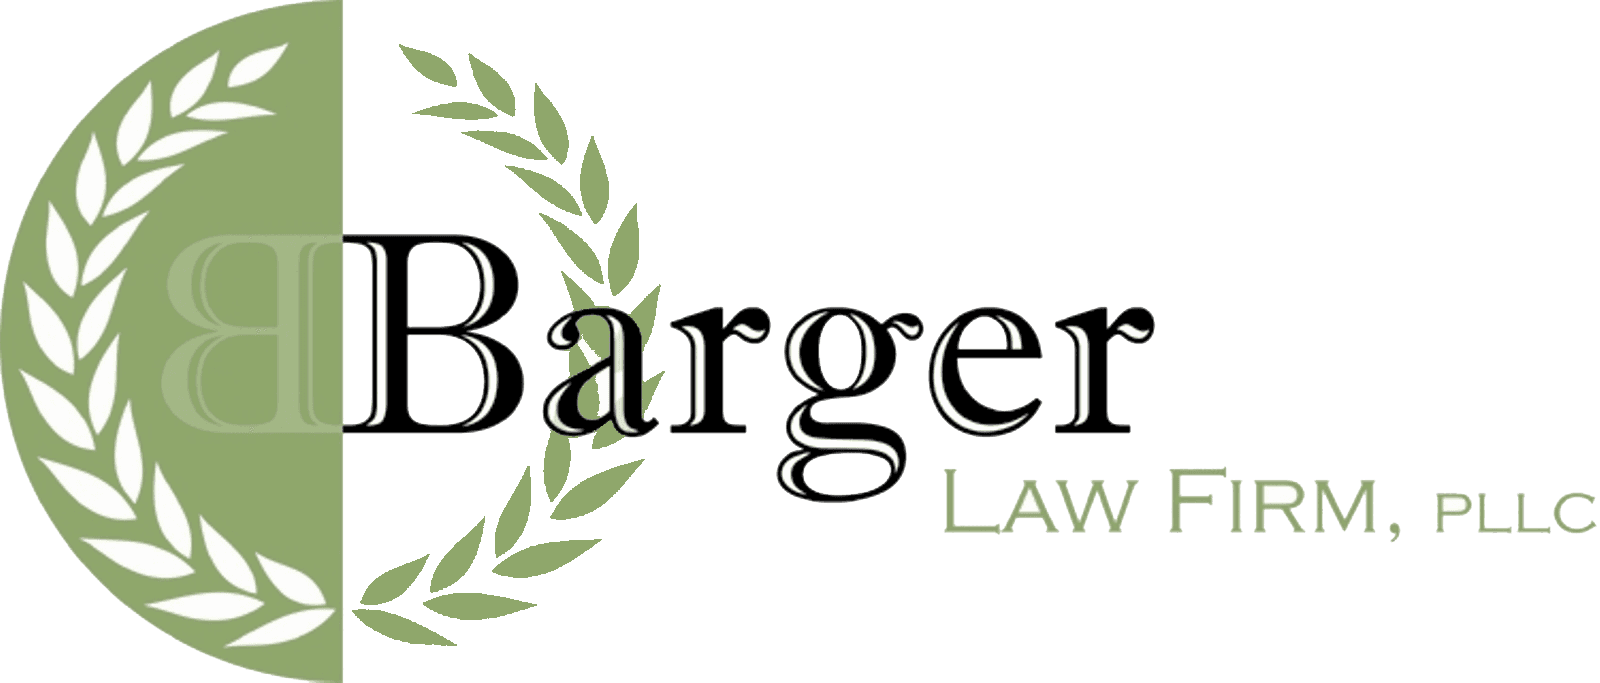 The Barger Law Firm, PLLC - Logo